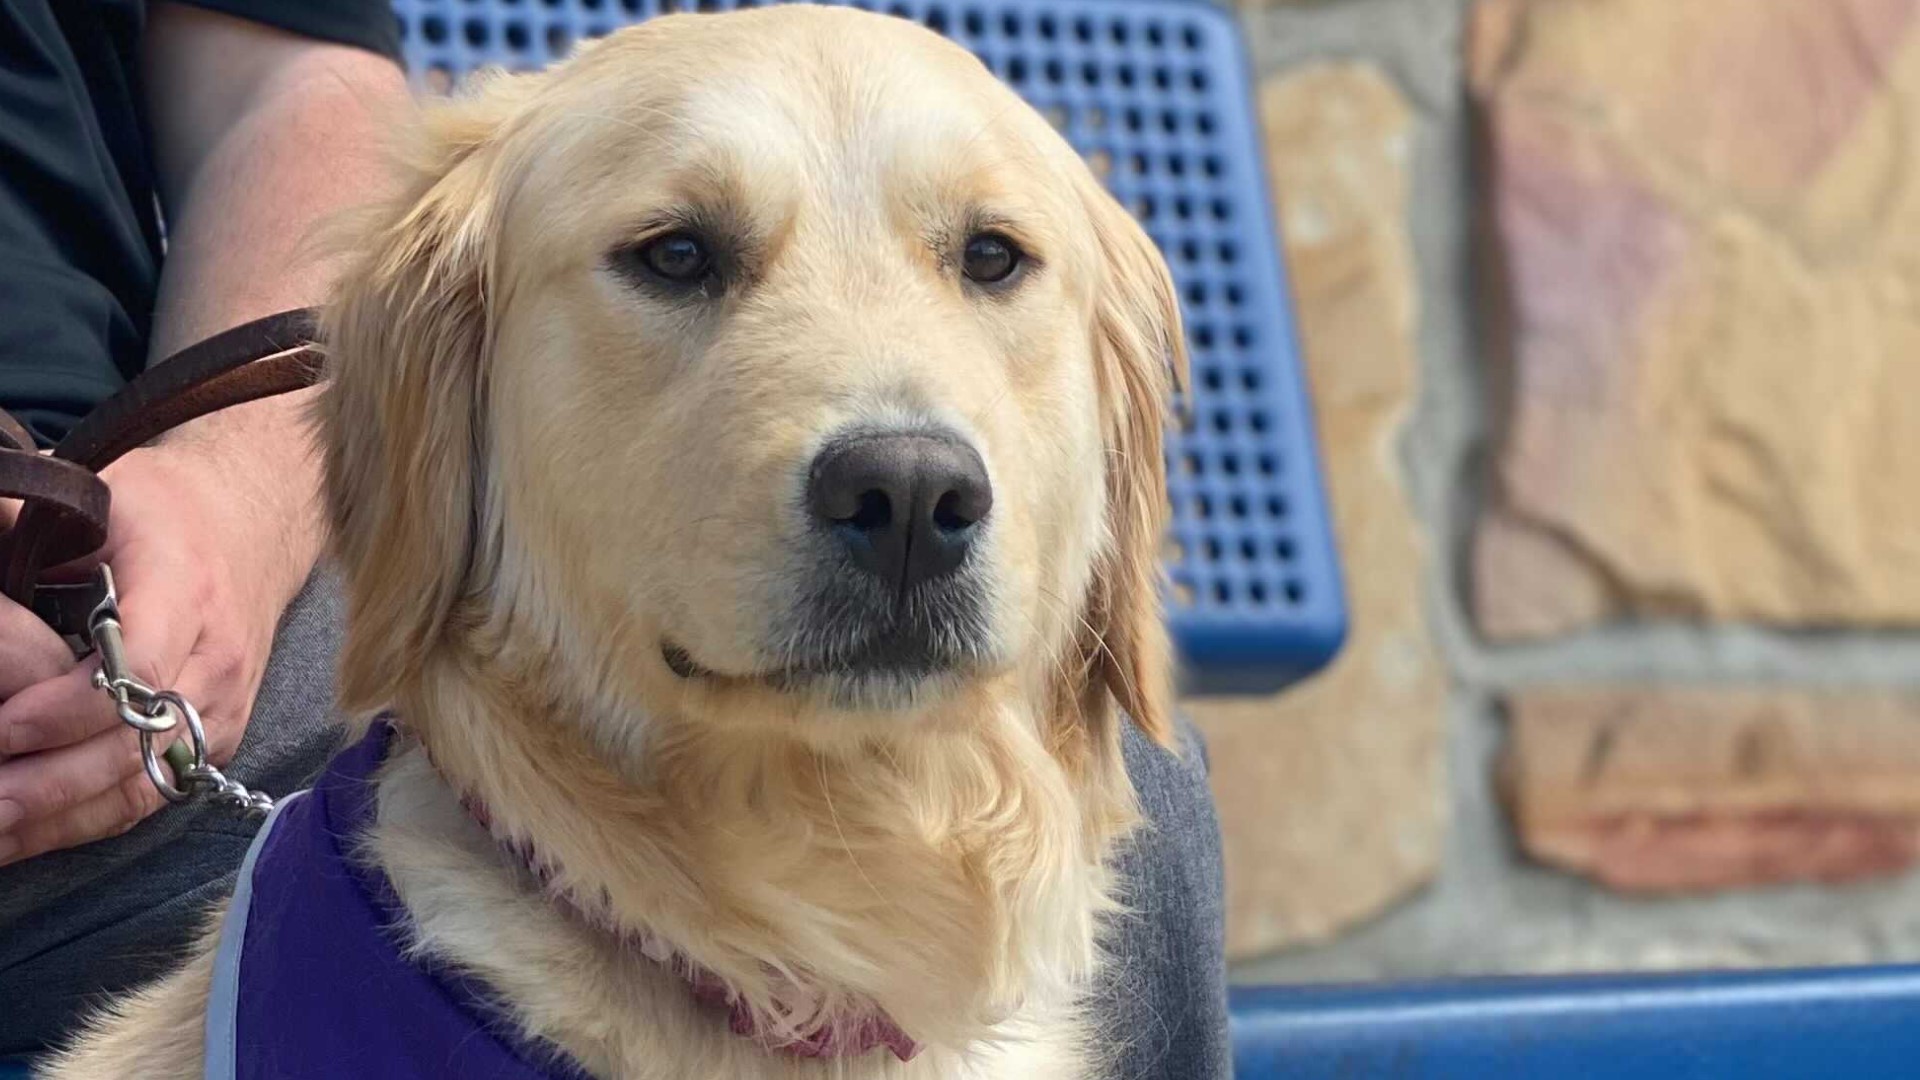 She's the first therapy dog for Whiteford. Excited students, staff and families rallied to fund training for the Golden Retriever and newest Eagle, Biscuit.